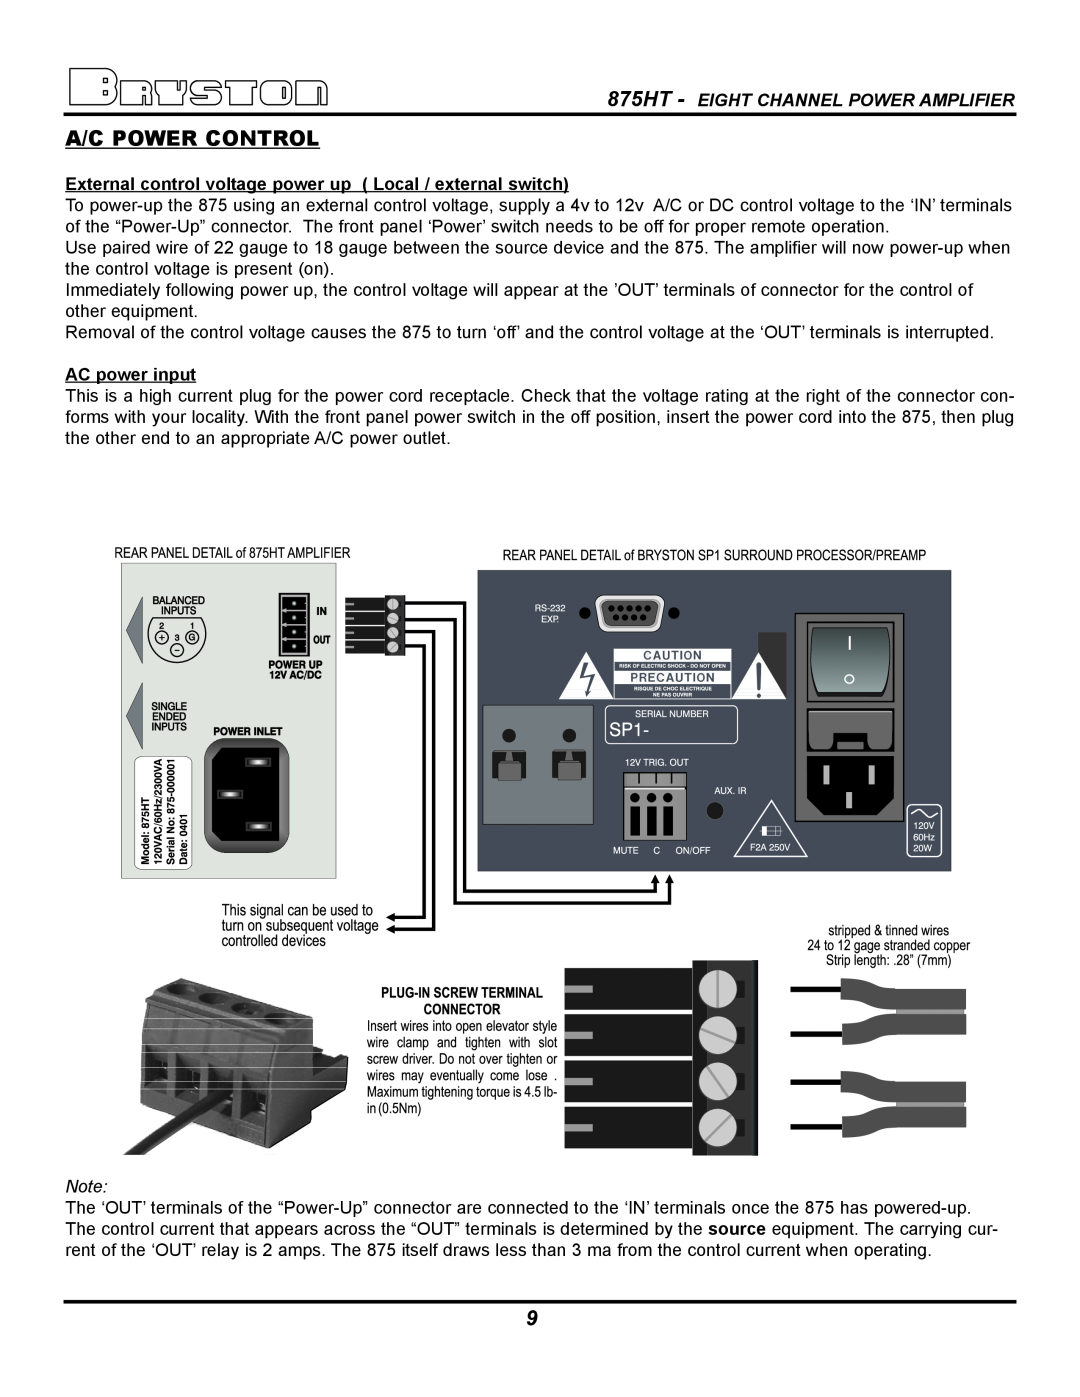 Bryston 875HT owner manual A/C Power Control, AC power input 